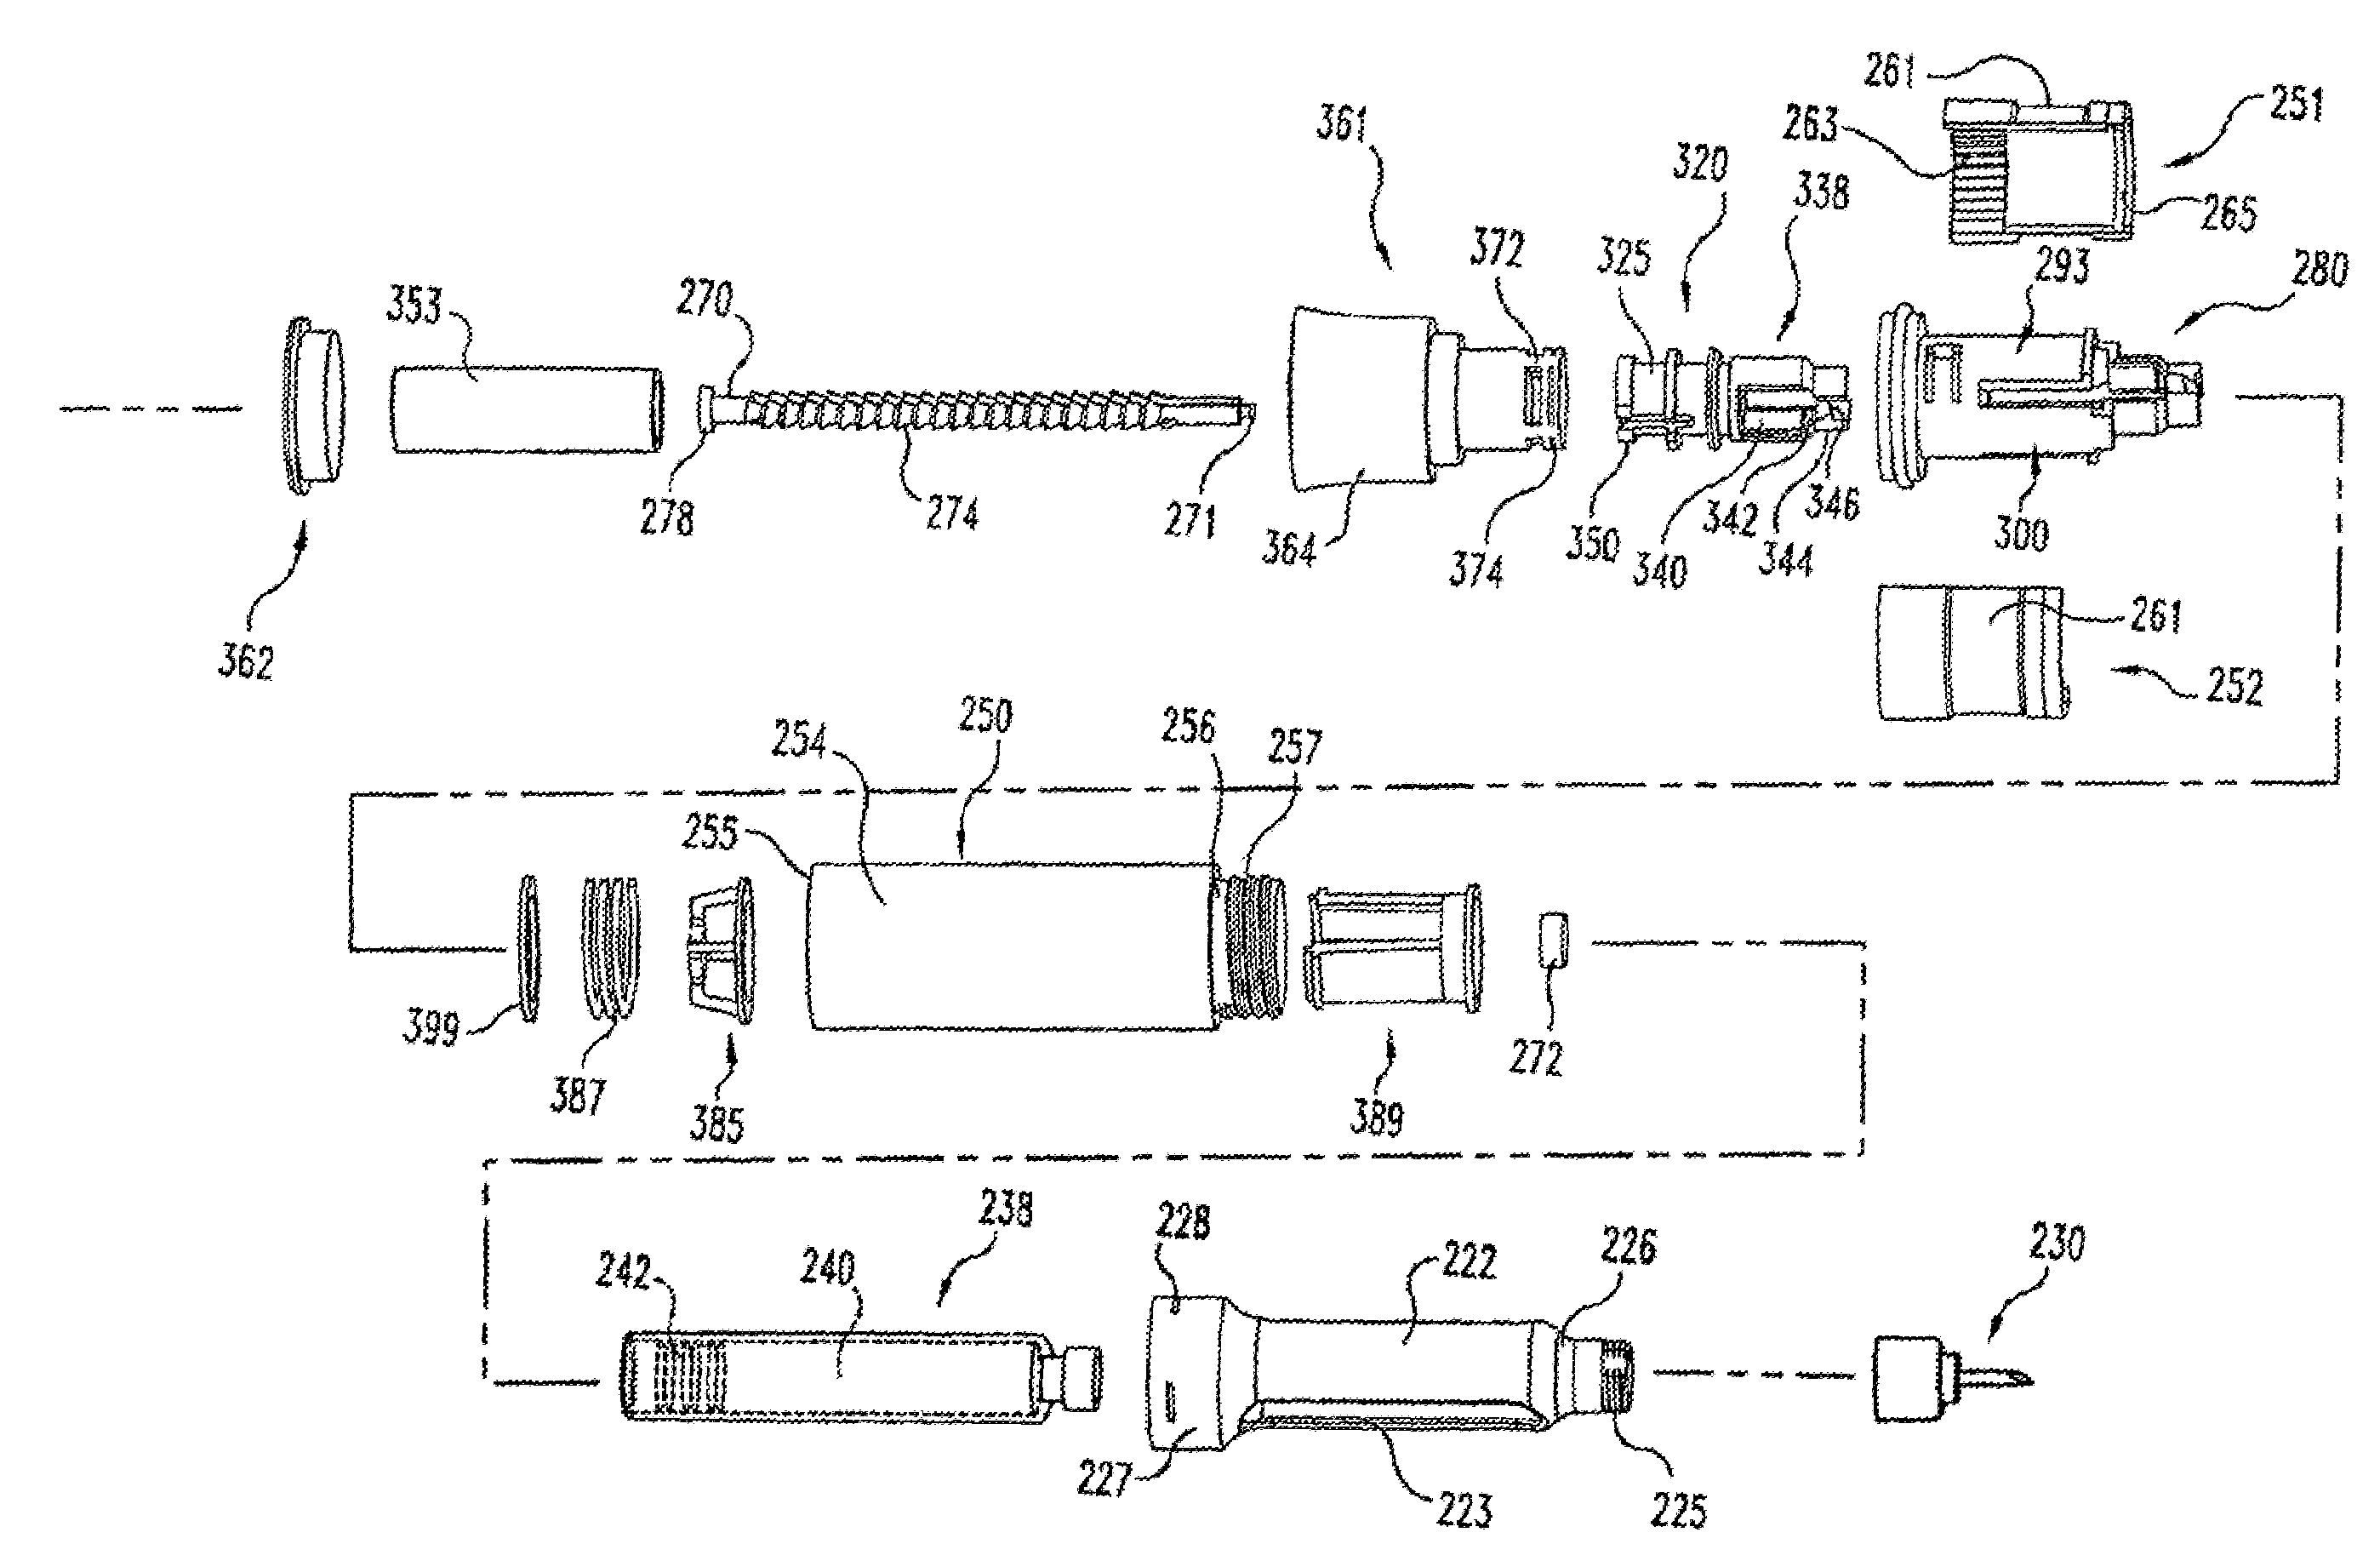 Medication dispensing apparatus configured for rotate to prime and pull/push to inject functionality